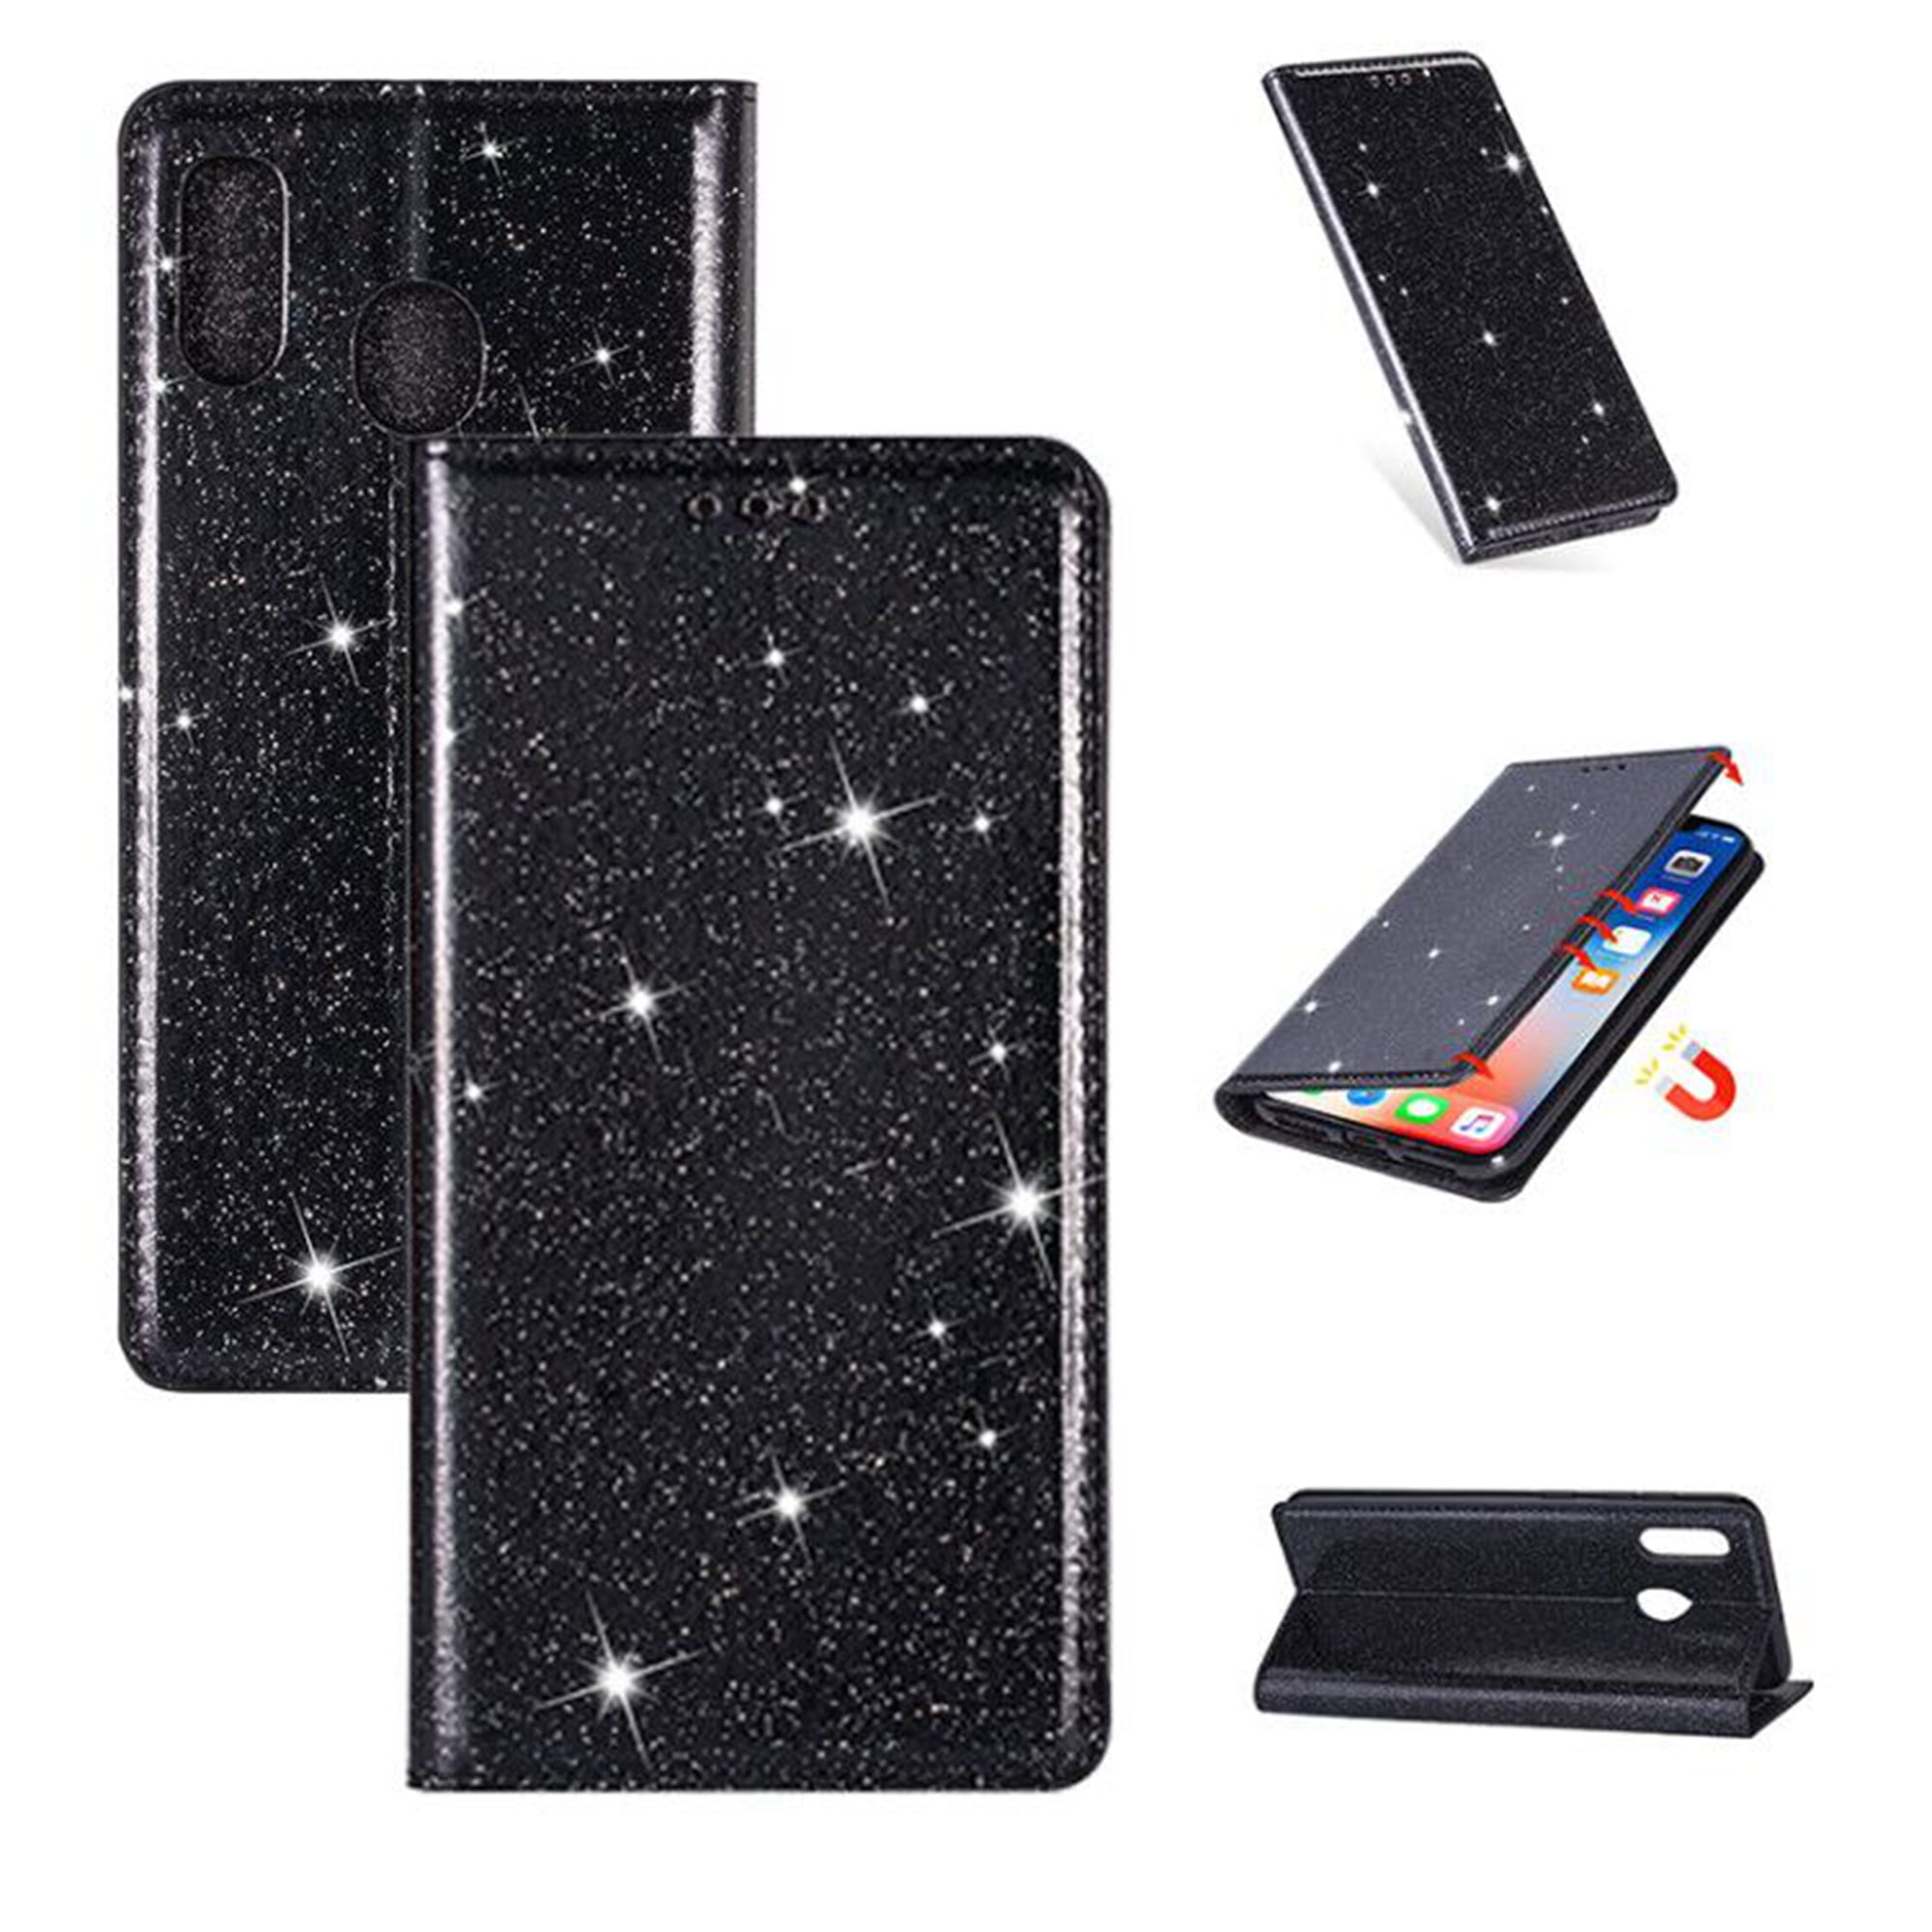 LORXU020099 Black A10e Lomogo Leather Wallet Case for Galaxy A20e Shockproof Flip Case Cover for Samsung Galaxy A20e A10e with Stand Feature Card Holder Magnetic Closure 